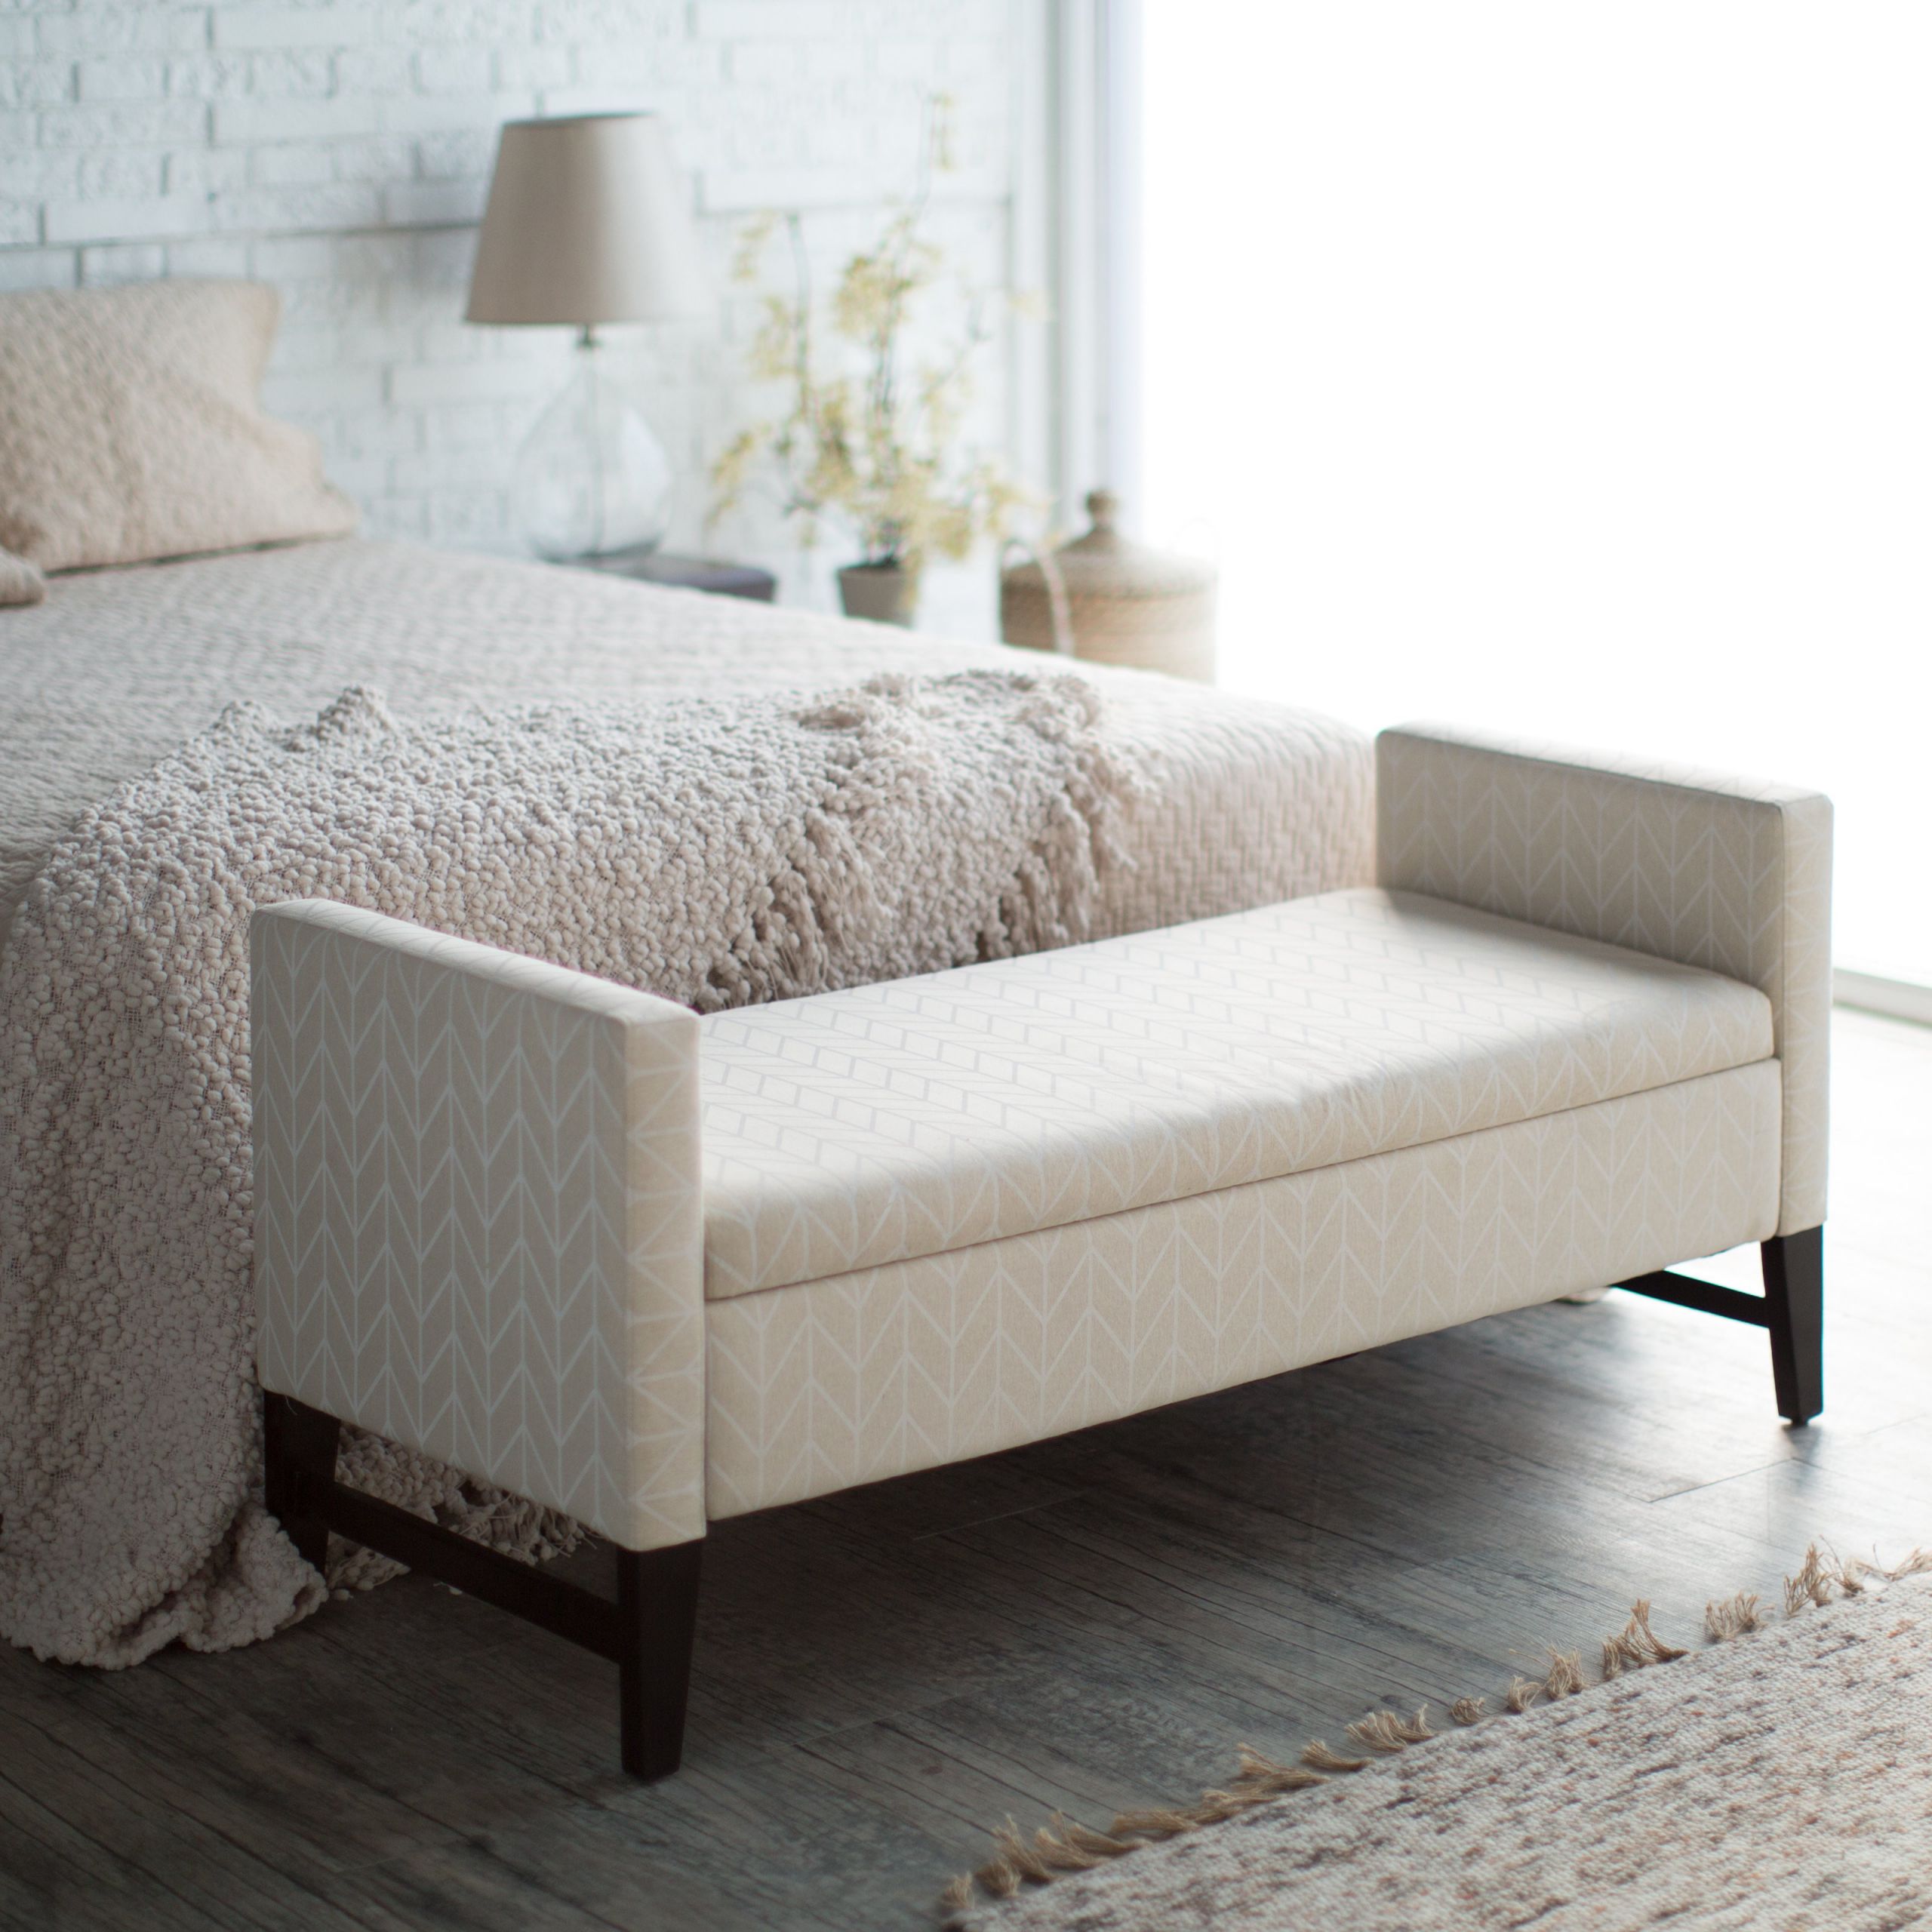 Storage Bed Benches
 End of Bed Storage Bench – HomesFeed